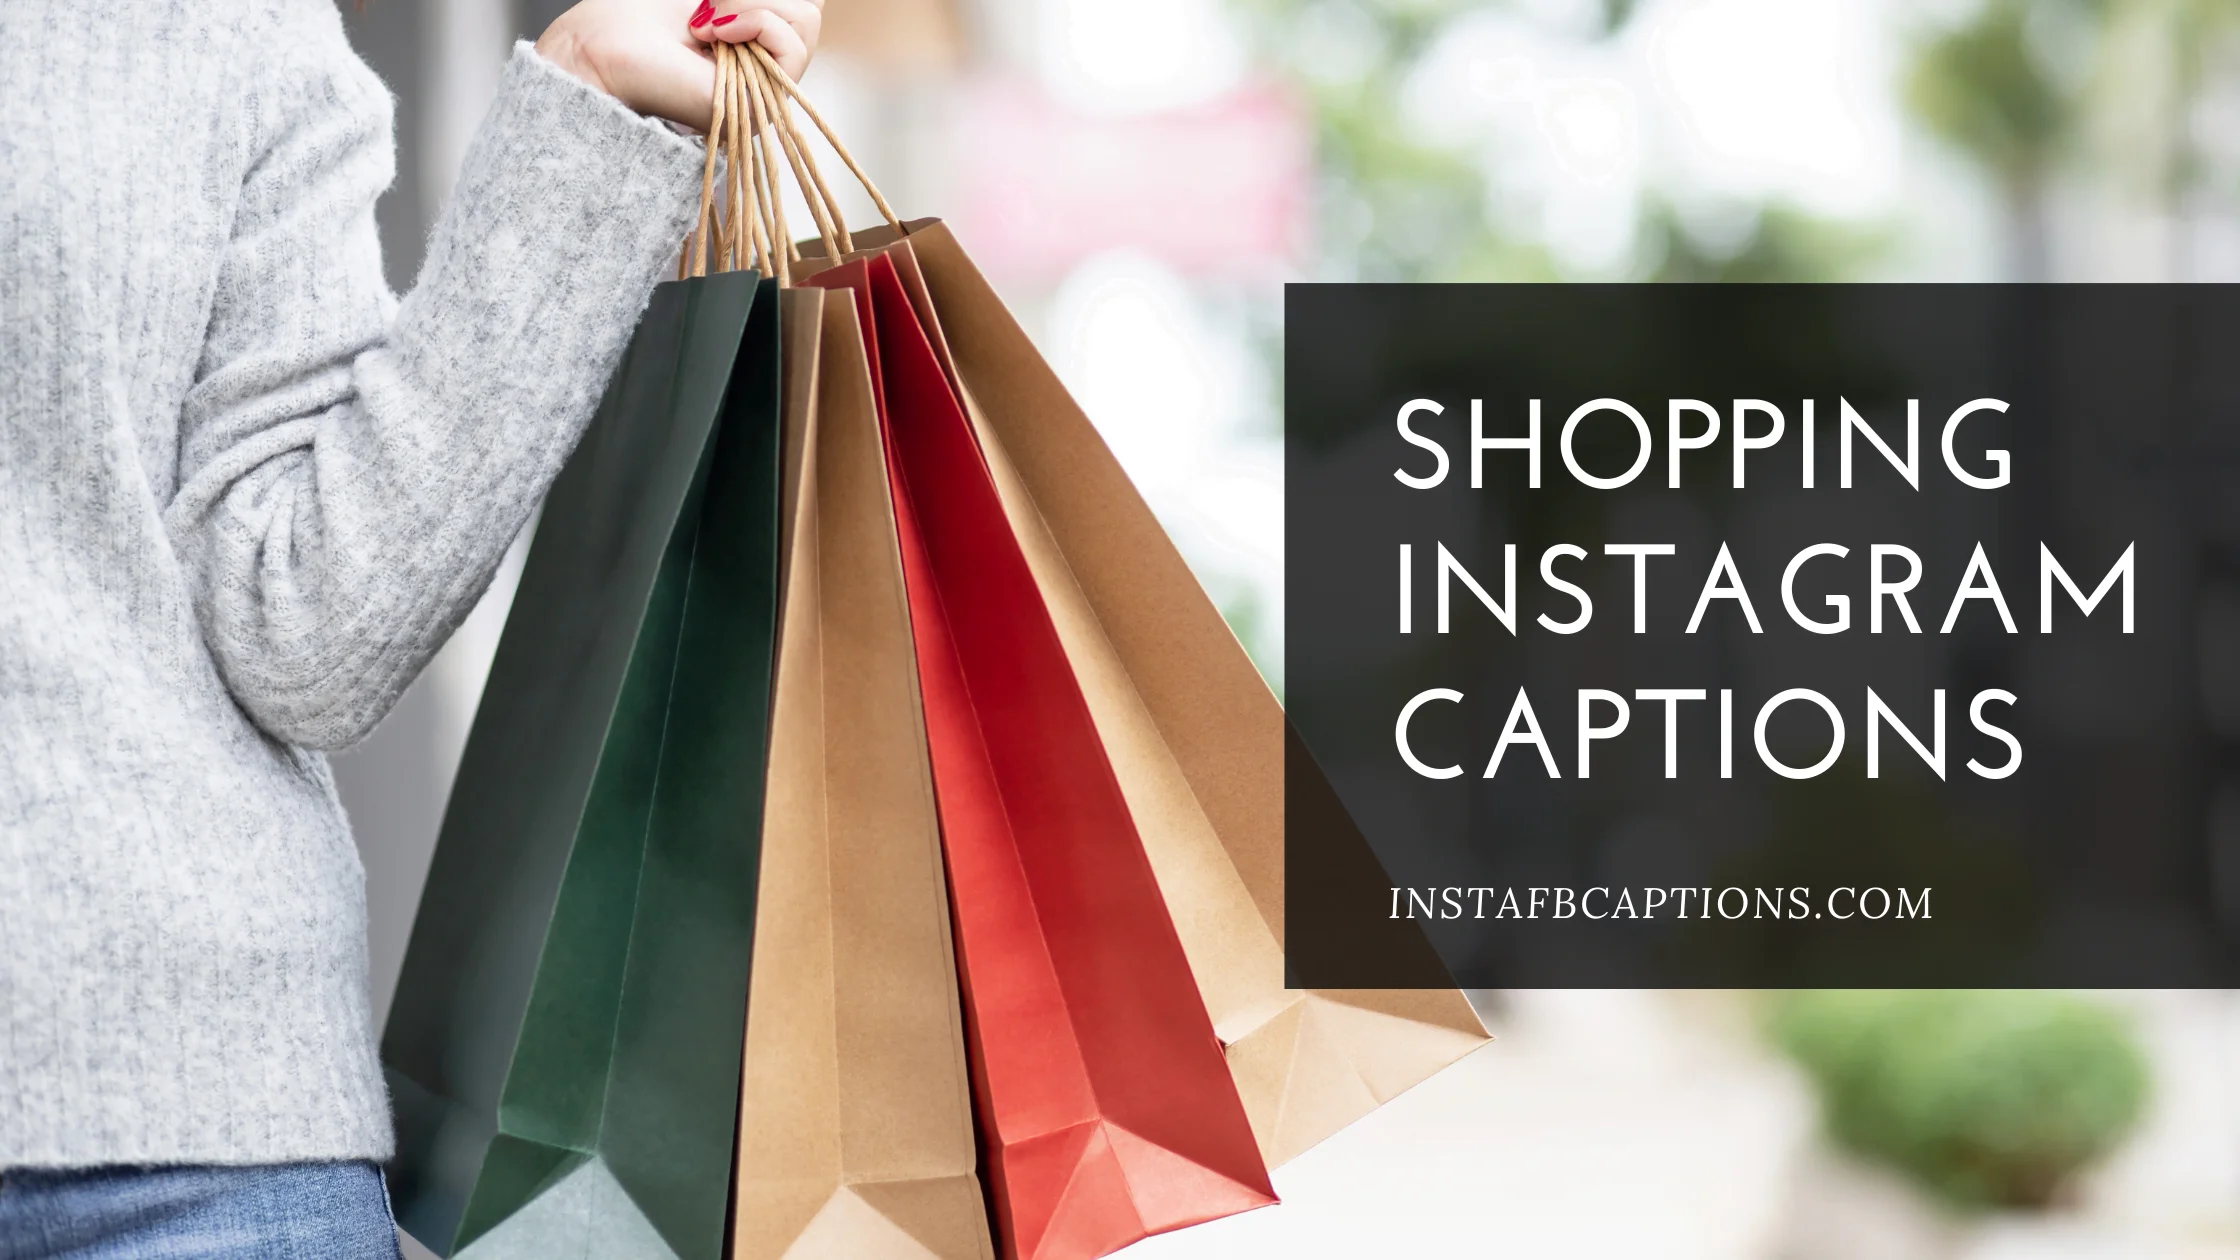 A lady hanging some shopping bags and a text Shopping Instagram Captions  - SHOPPING Instagram Captions - Mastering the Art of Instagram Shopping: Captions that Convert